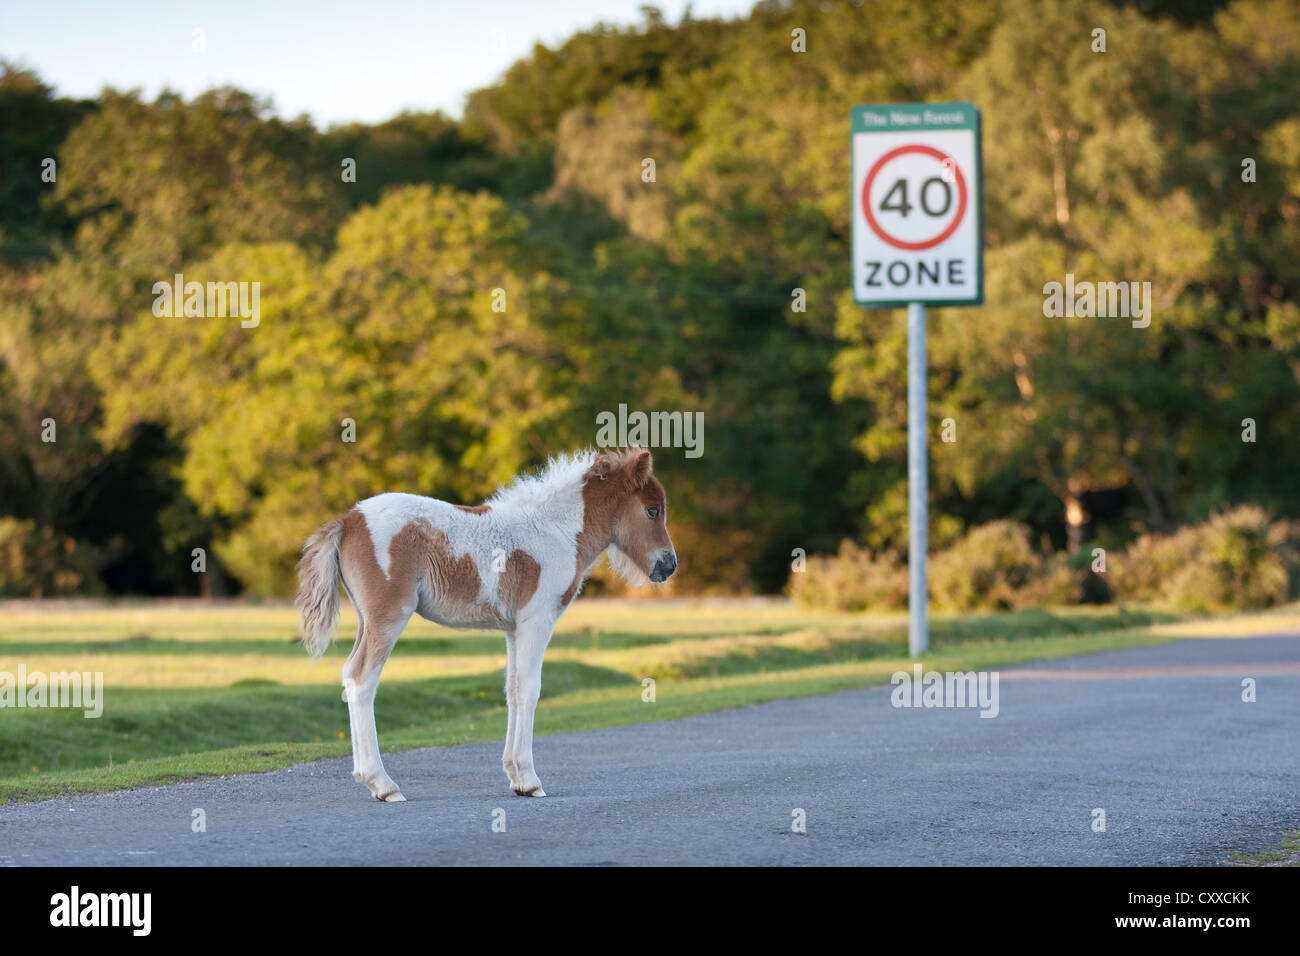 A Shetland pony foal stands in the road in the New Forest with a 40 mph sign in the background Stock Photo